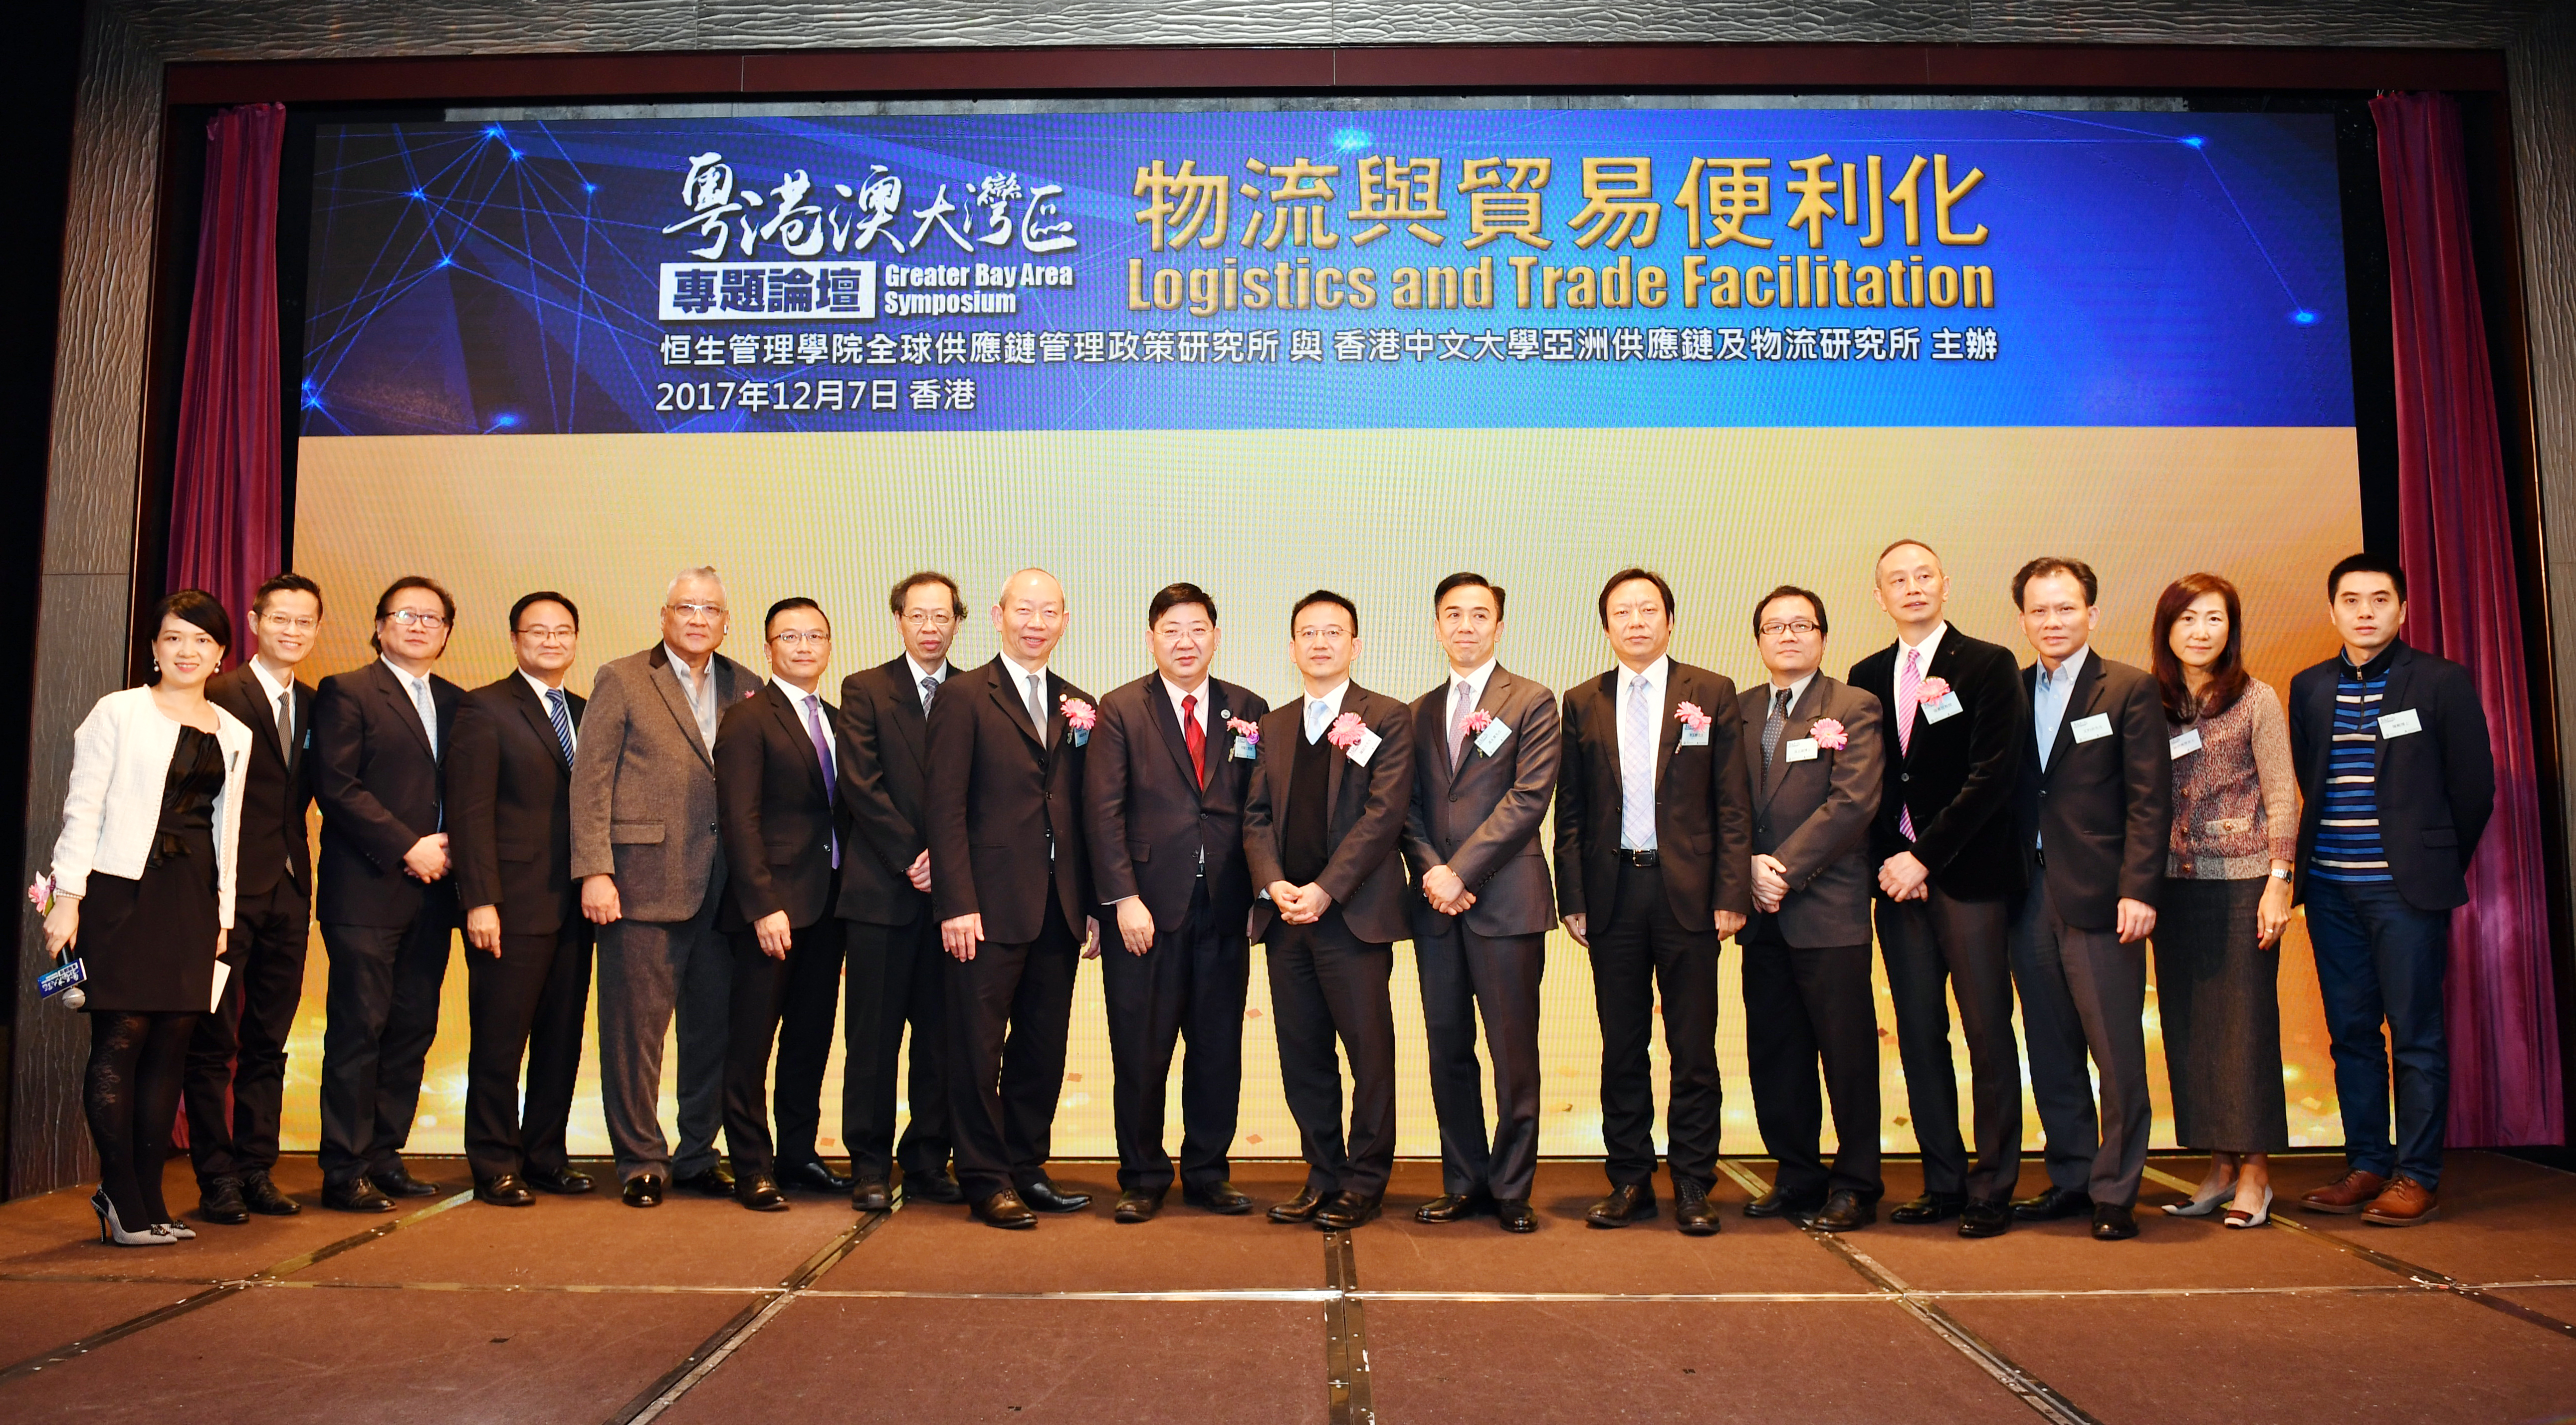 Group photo of keynote speakers, panellists, representatives of chief sponsor, organisers and co-organisers

From left: Dr Collin Wong, Head of Department of SCM; Dr Danny Ho, Assistant Professor and Convenor of the Symposium; Professor Lawrence Leung, Dean of HSMC School of Decision Sciences; Mr Sunny Ho, Executive Director of The Hong Kong Shippers’ Council; Dr Edward Kwok Man Chan, Executive Committee Members of The Chinese Manufacturers’ Association of Hong Kong and Founder of German Pool (Hong Kong) Ltd; Mr Horace Lo, Chief Development Officer of Modern Terminals Ltd; Professor Y V Hui, Vice-President (Academic and Research) of HSMC; Dr Willie Lai, Founding Convenor of the Guangdong-Hong Kong-Macao-Bay Area Economic and Trade Association; President Simon Ho of HSMC; Mr Andy Chan Shui-fu, Under Secretary for Constitutional and Mainland Affairs; Mr Wilson Fung Wing-yip, Executive Director of Corporate Development of Hong Kong Airport Authority; Dr Li Yubin, Deputy General Manager of China Merchants Port Holdings Co Ltd; Dr Stephen Ng, Director of HSMC’s Policy Research Institute of Global Supply Chain; Professor Cheung Waiman, Director of CUHK’s Asian Institute of Supply Chains & Logistics; Mr Man Cheuk Fei, Publisher & CEO of Master Insight Media Ltd; Mrs Jenny Lam, Chief Executive Officer of Cathay Pacific Services Ltd; and Dr Chen Gang, Associate Professor of Lingnan College, Sun Yat-Sen University